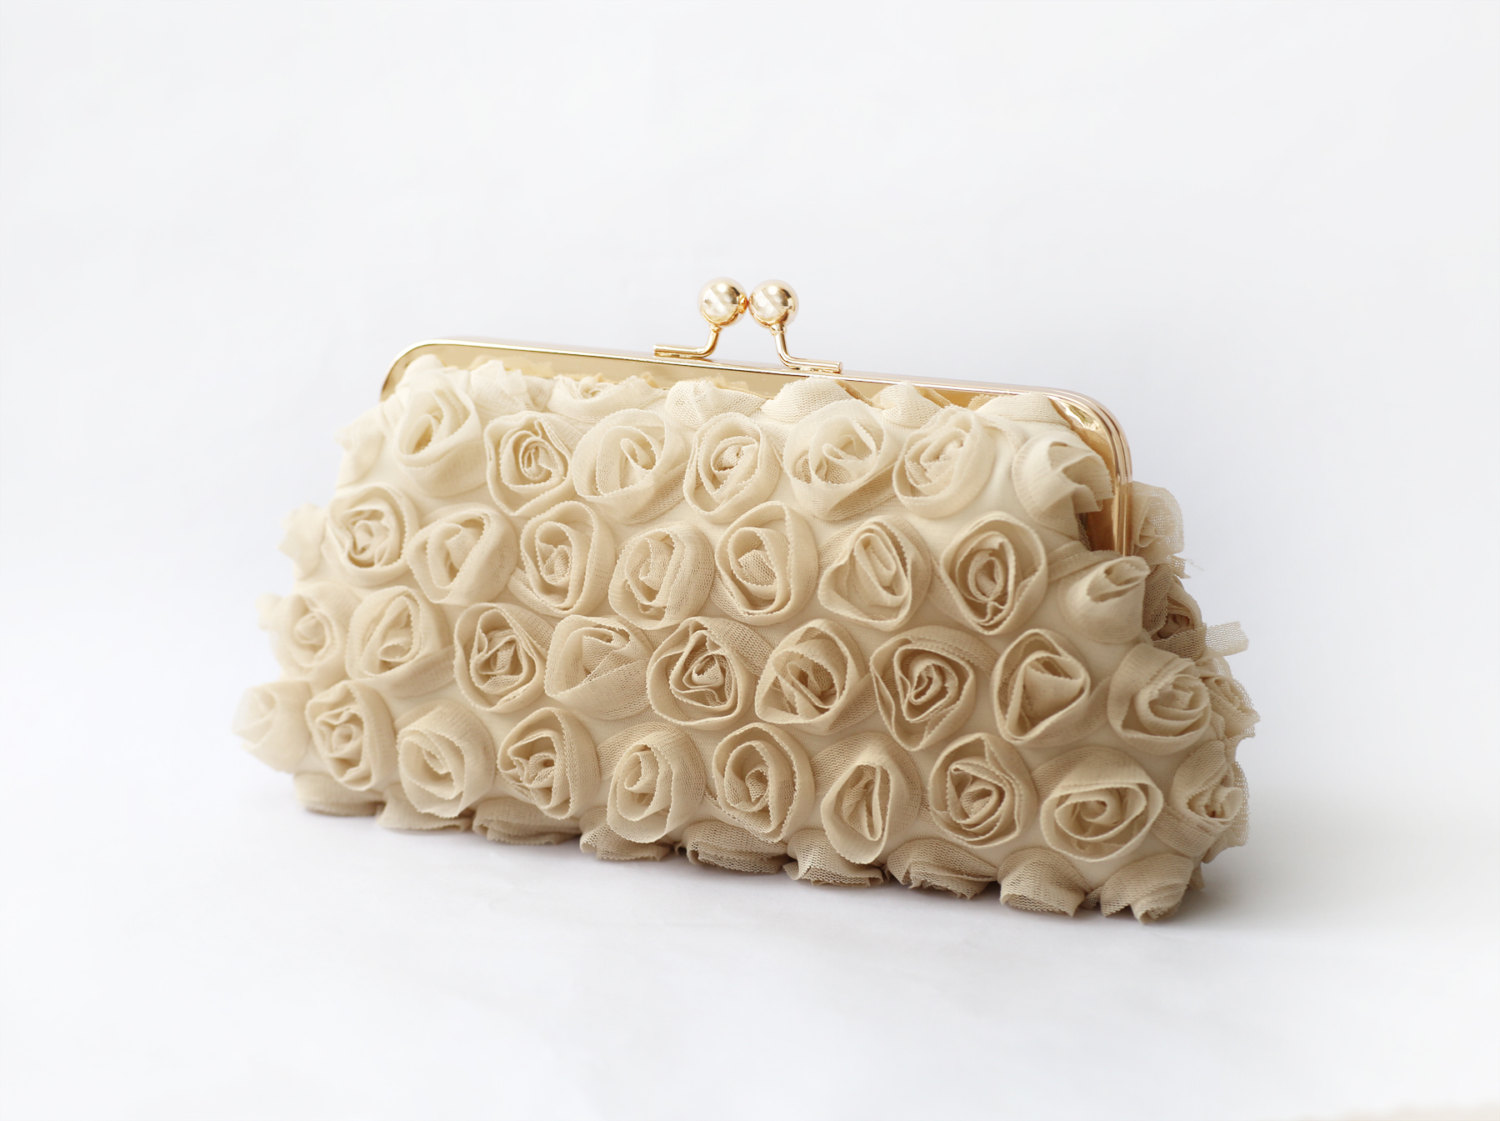 rosebuds floral inspired wedding clutch | flower bags clutches weddings by ANGEE W.